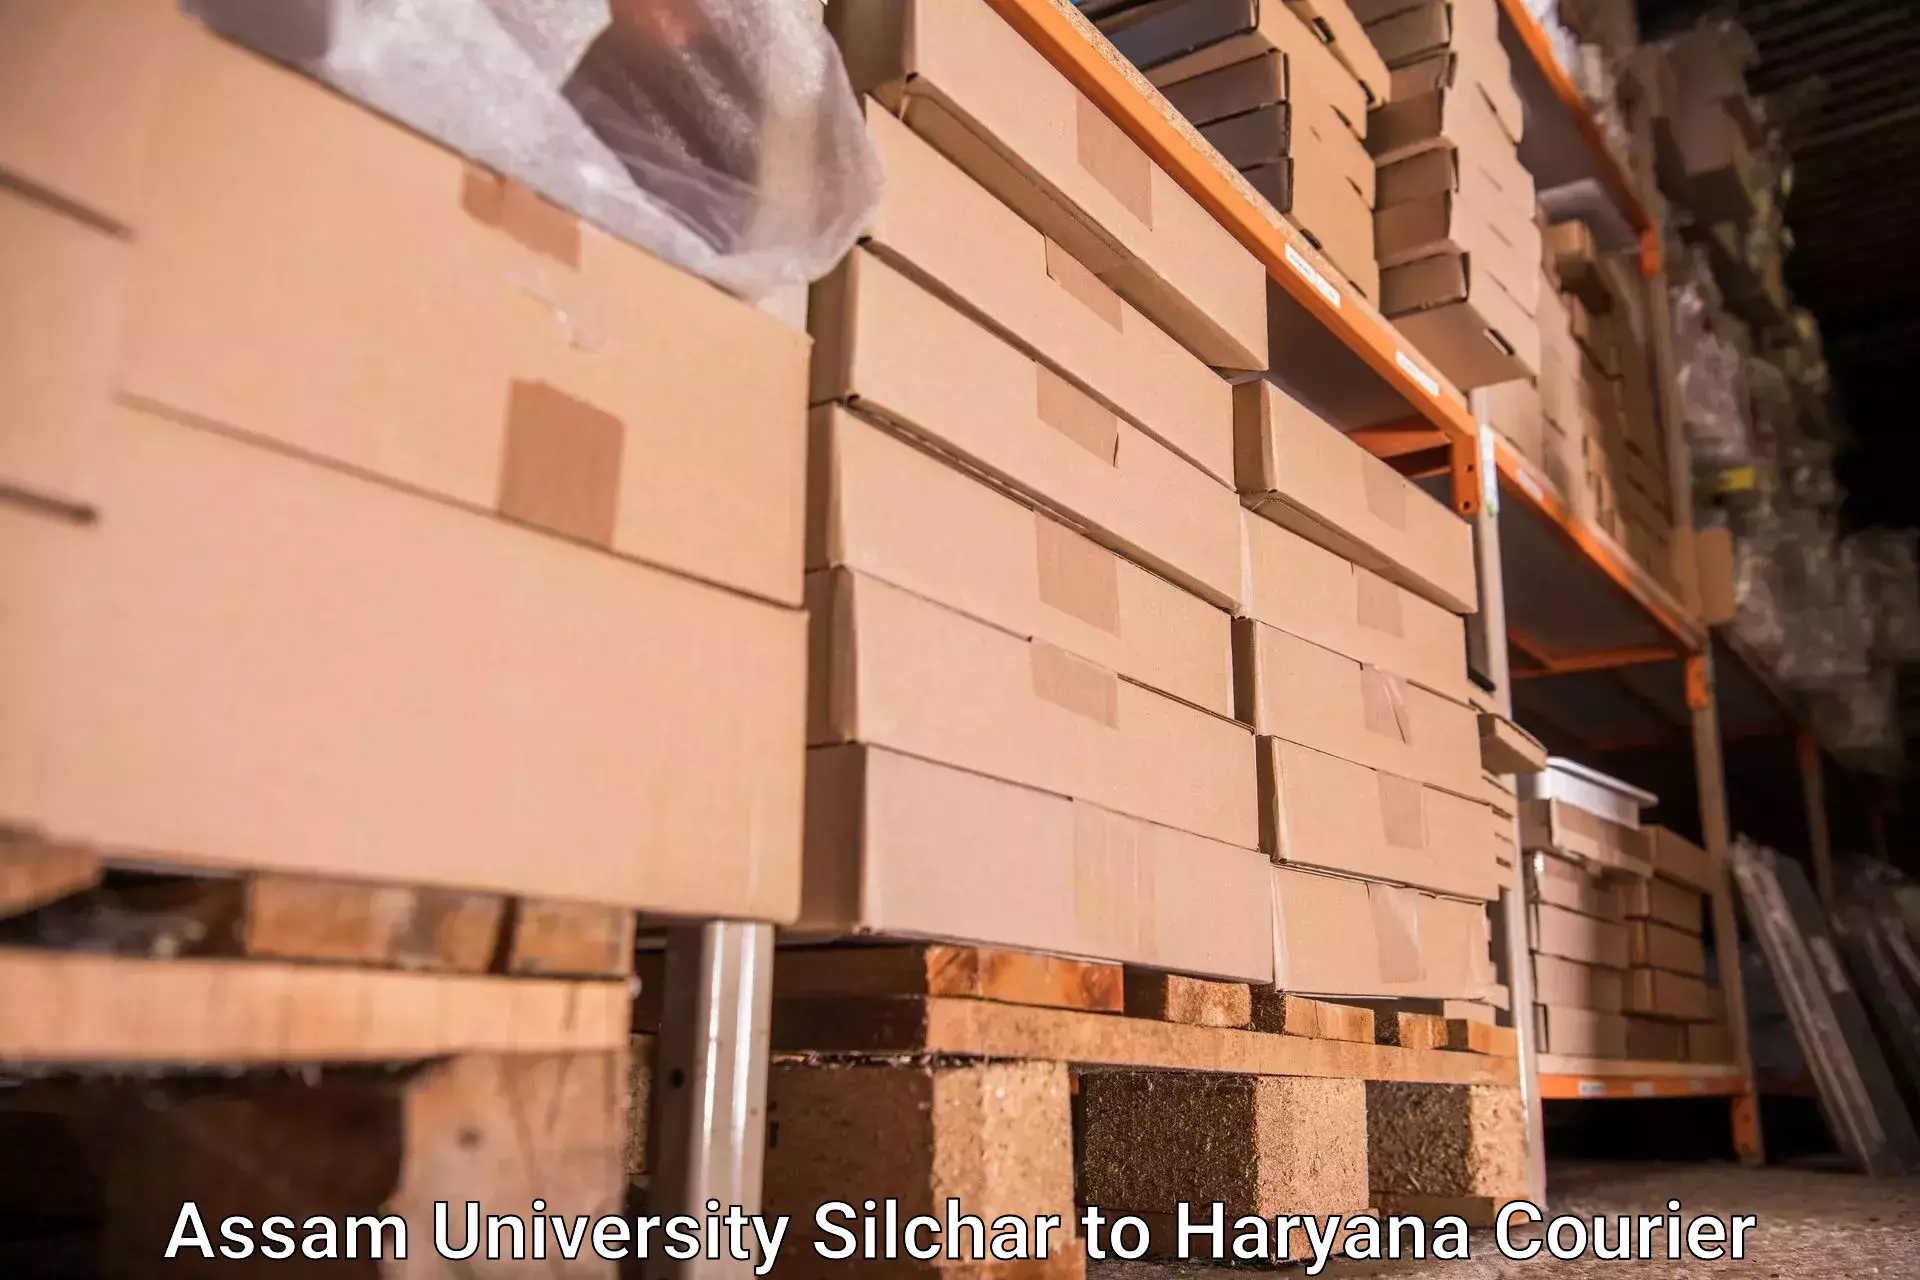 Instant baggage transport quote Assam University Silchar to NCR Haryana